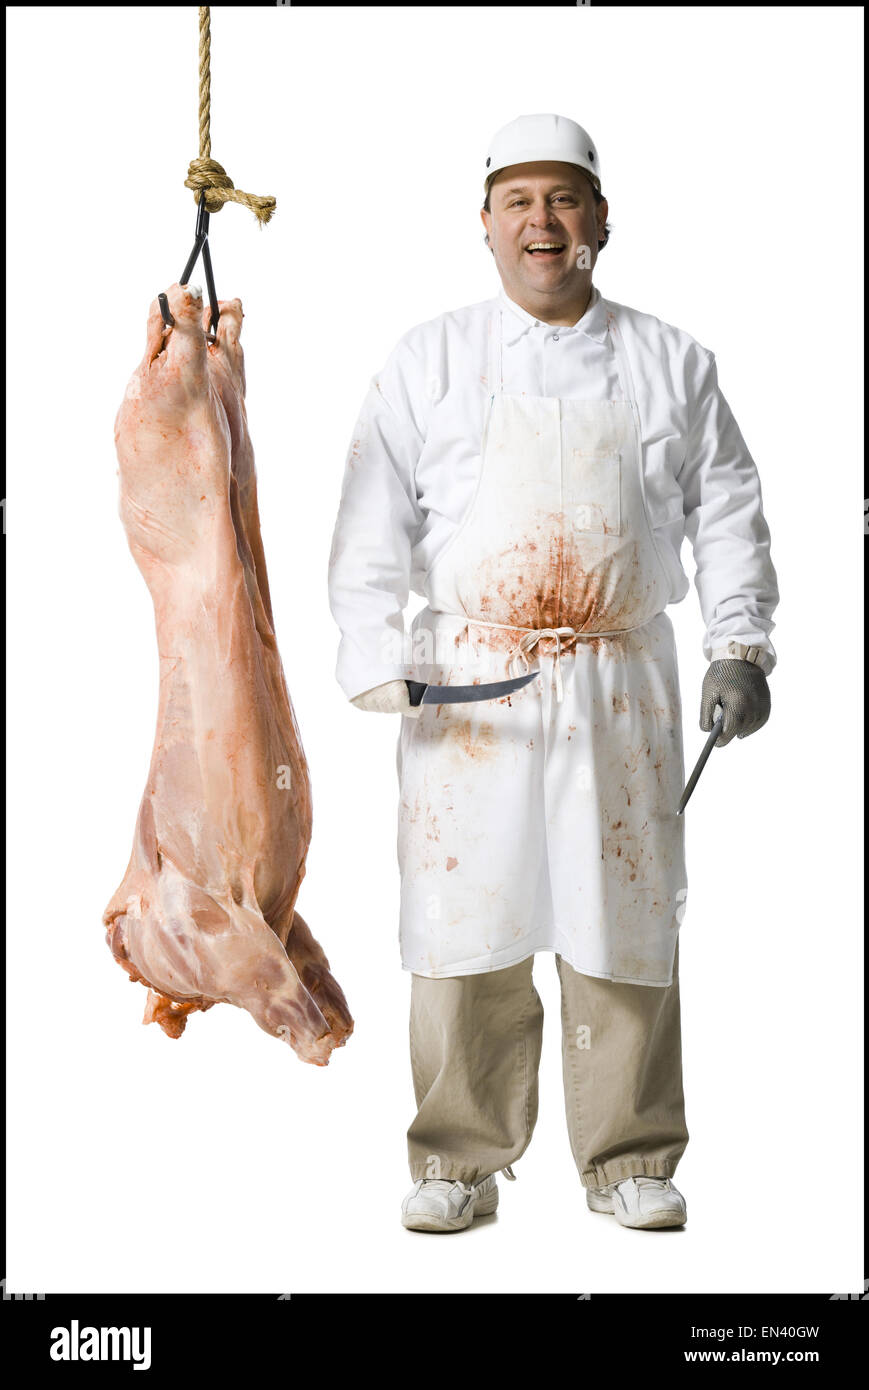 Butcher standing with hanging carcass and knife Stock Photo